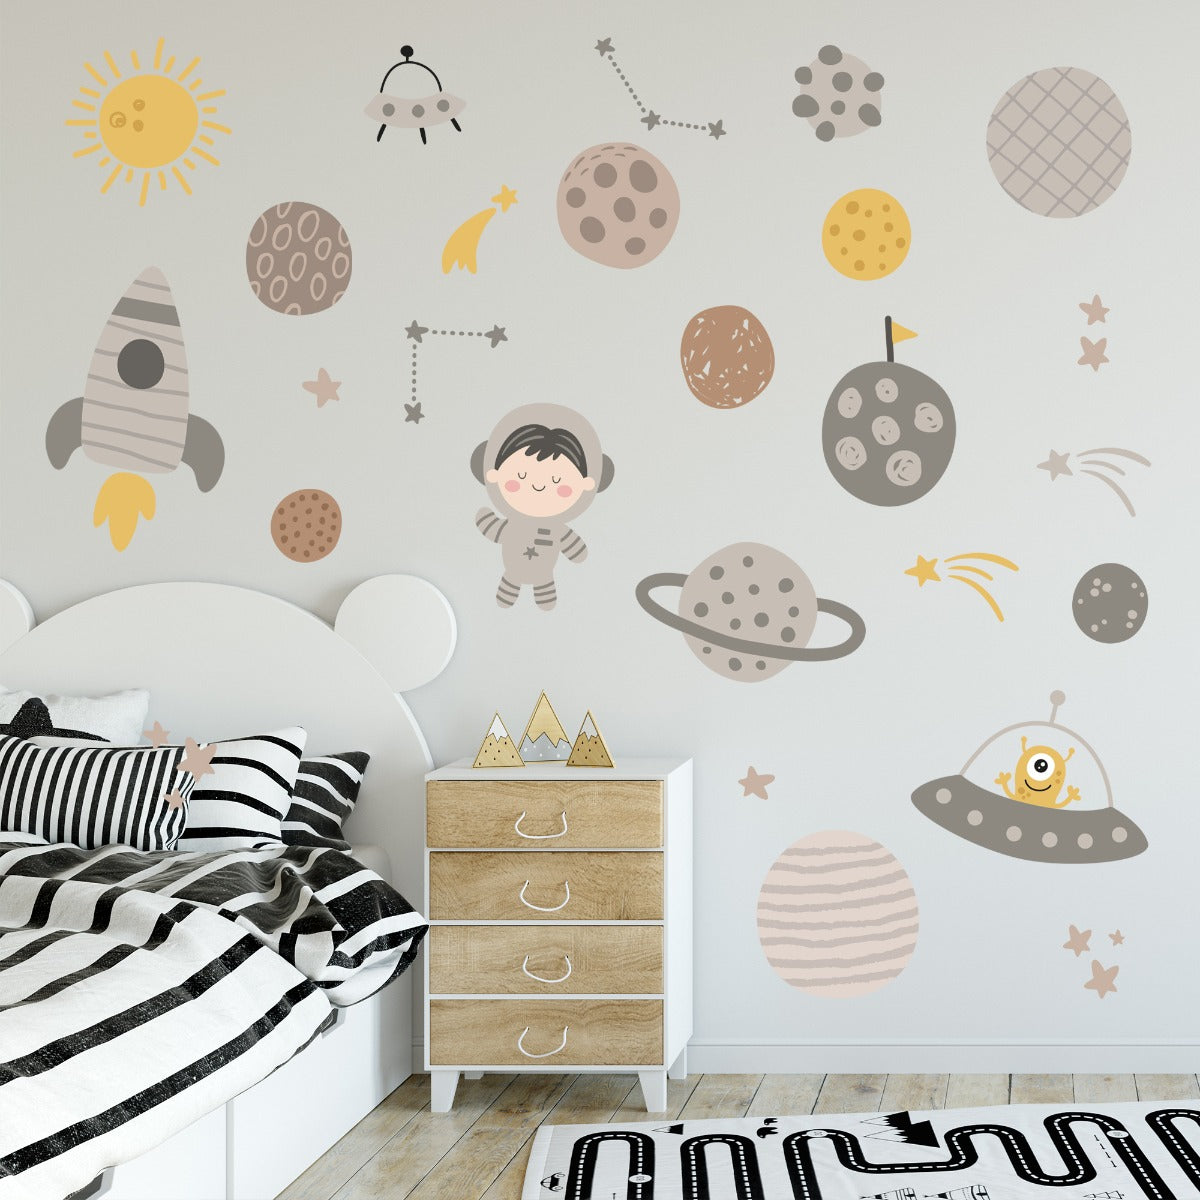 Space Wall Sticker - Space Icons Neutral Tones